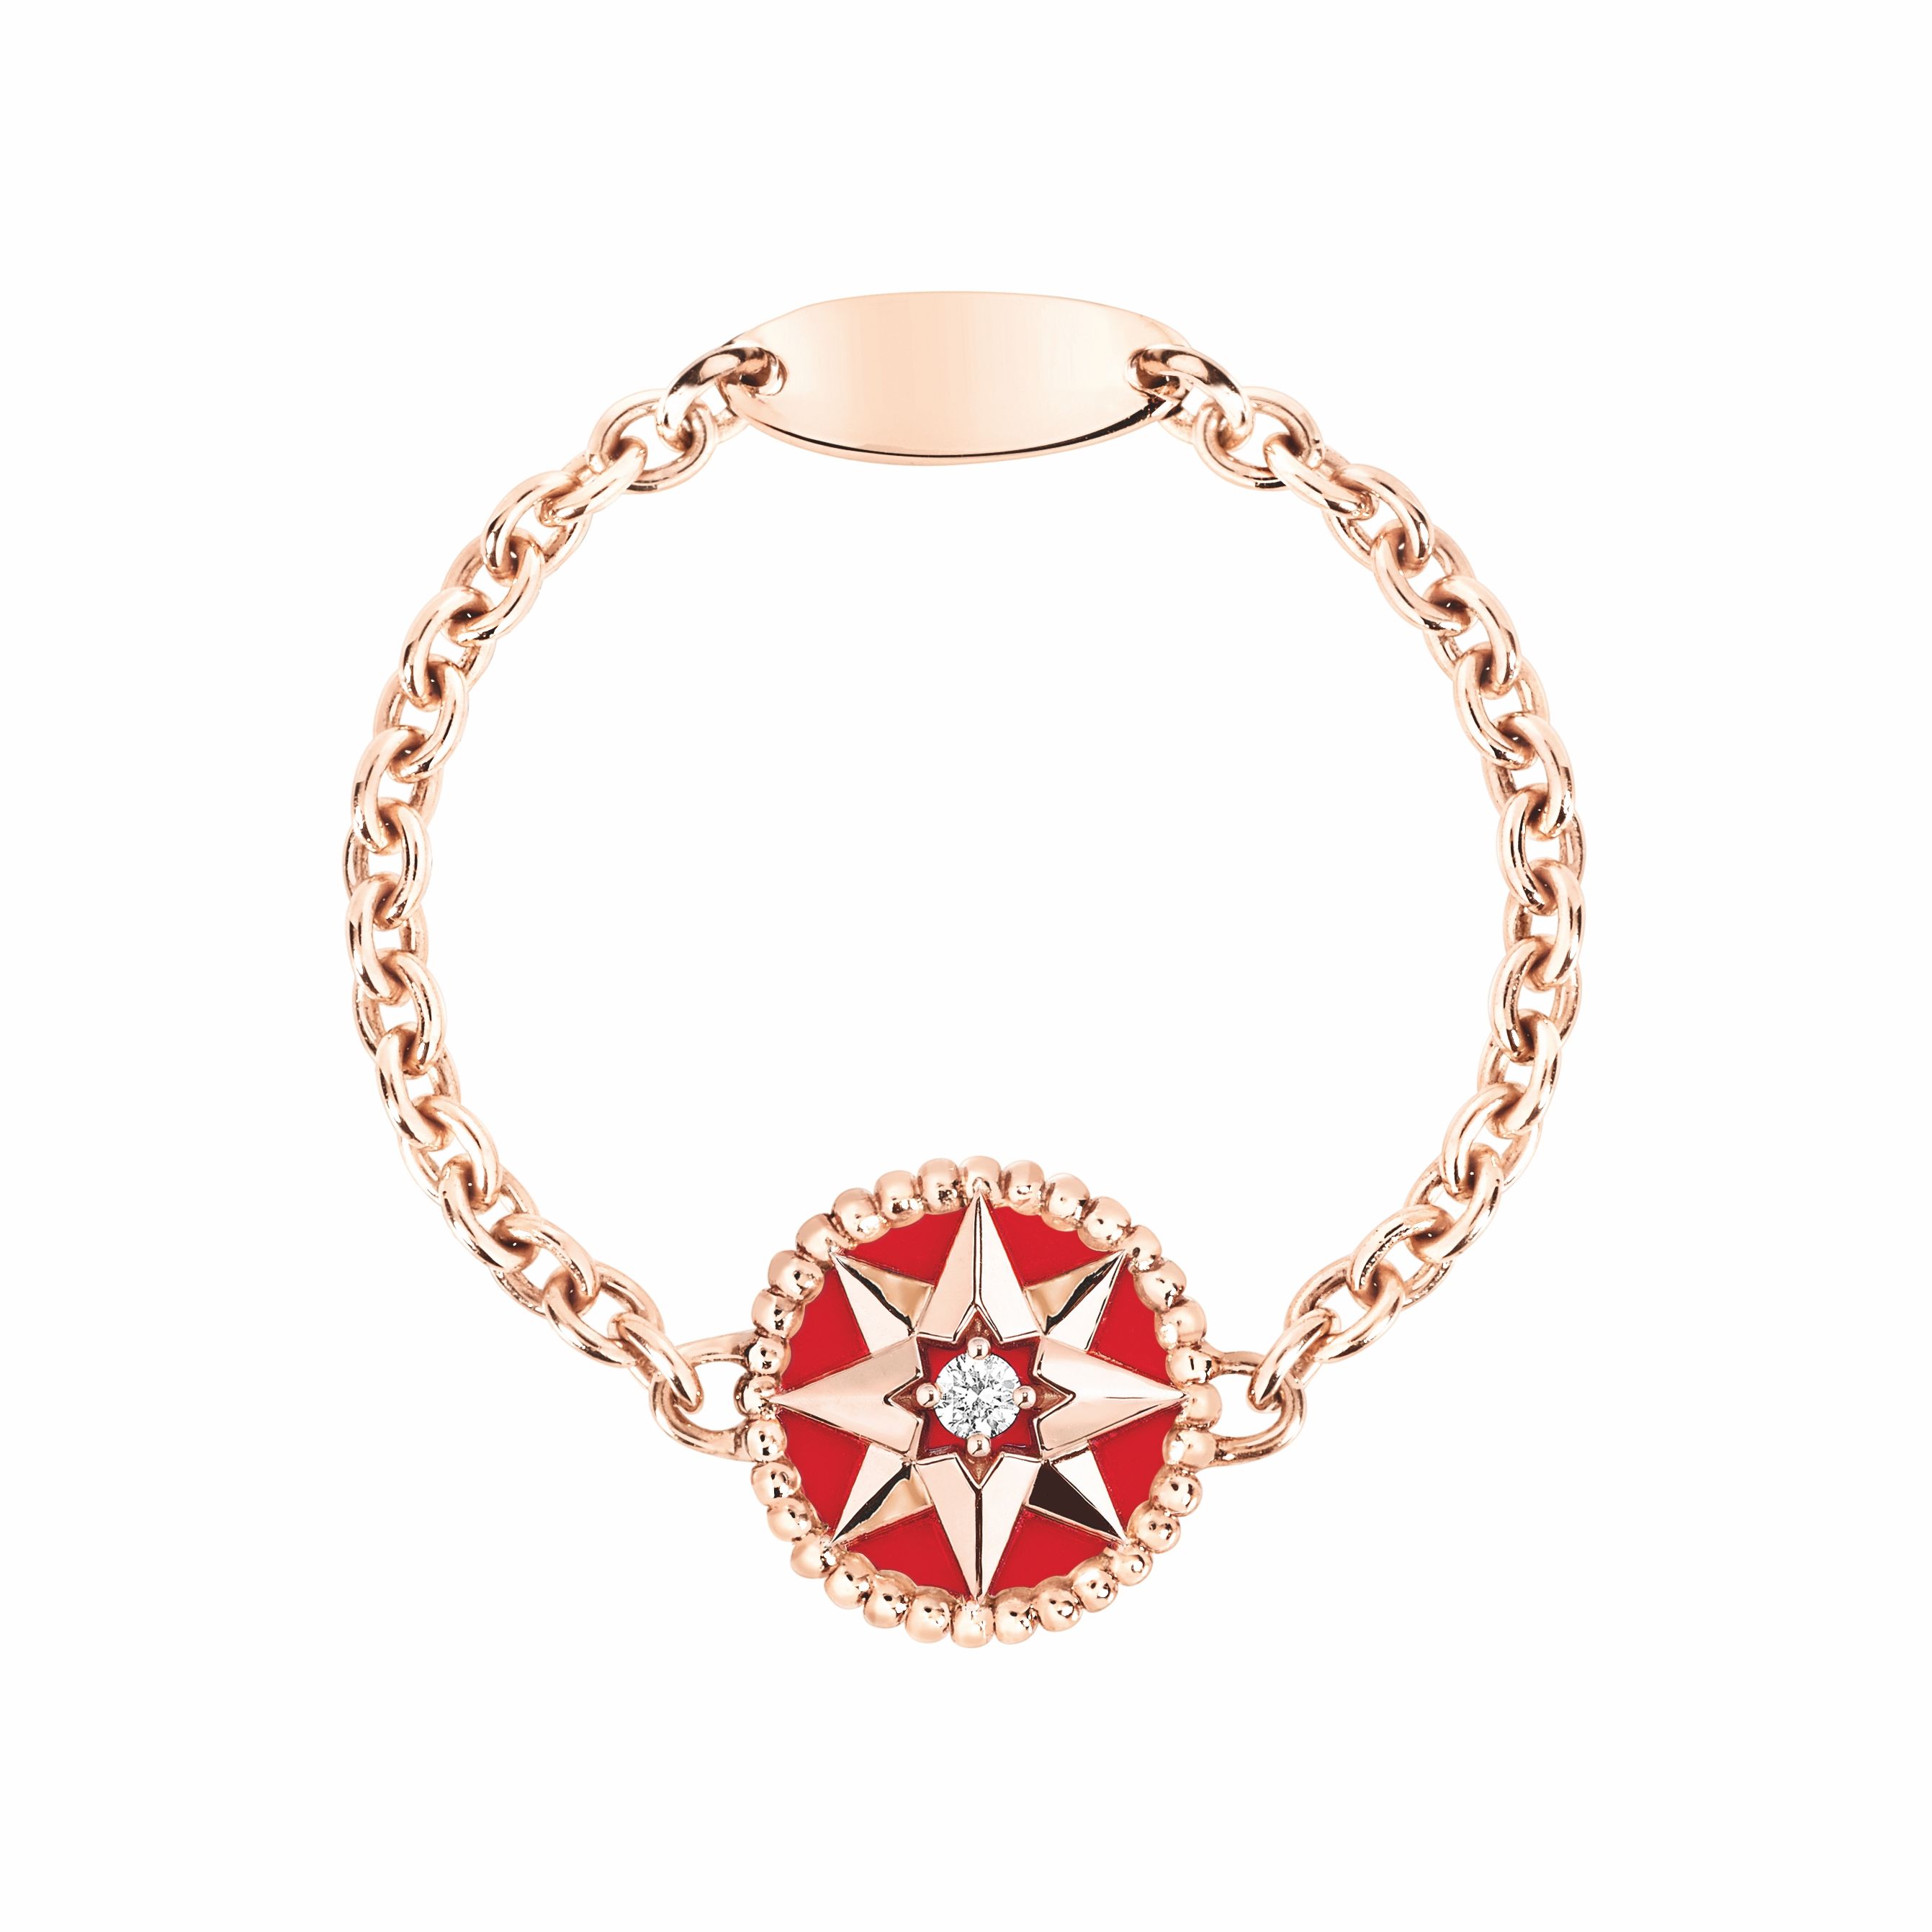 Dior's latest jewellery collection 'Rose des Vents' launches in